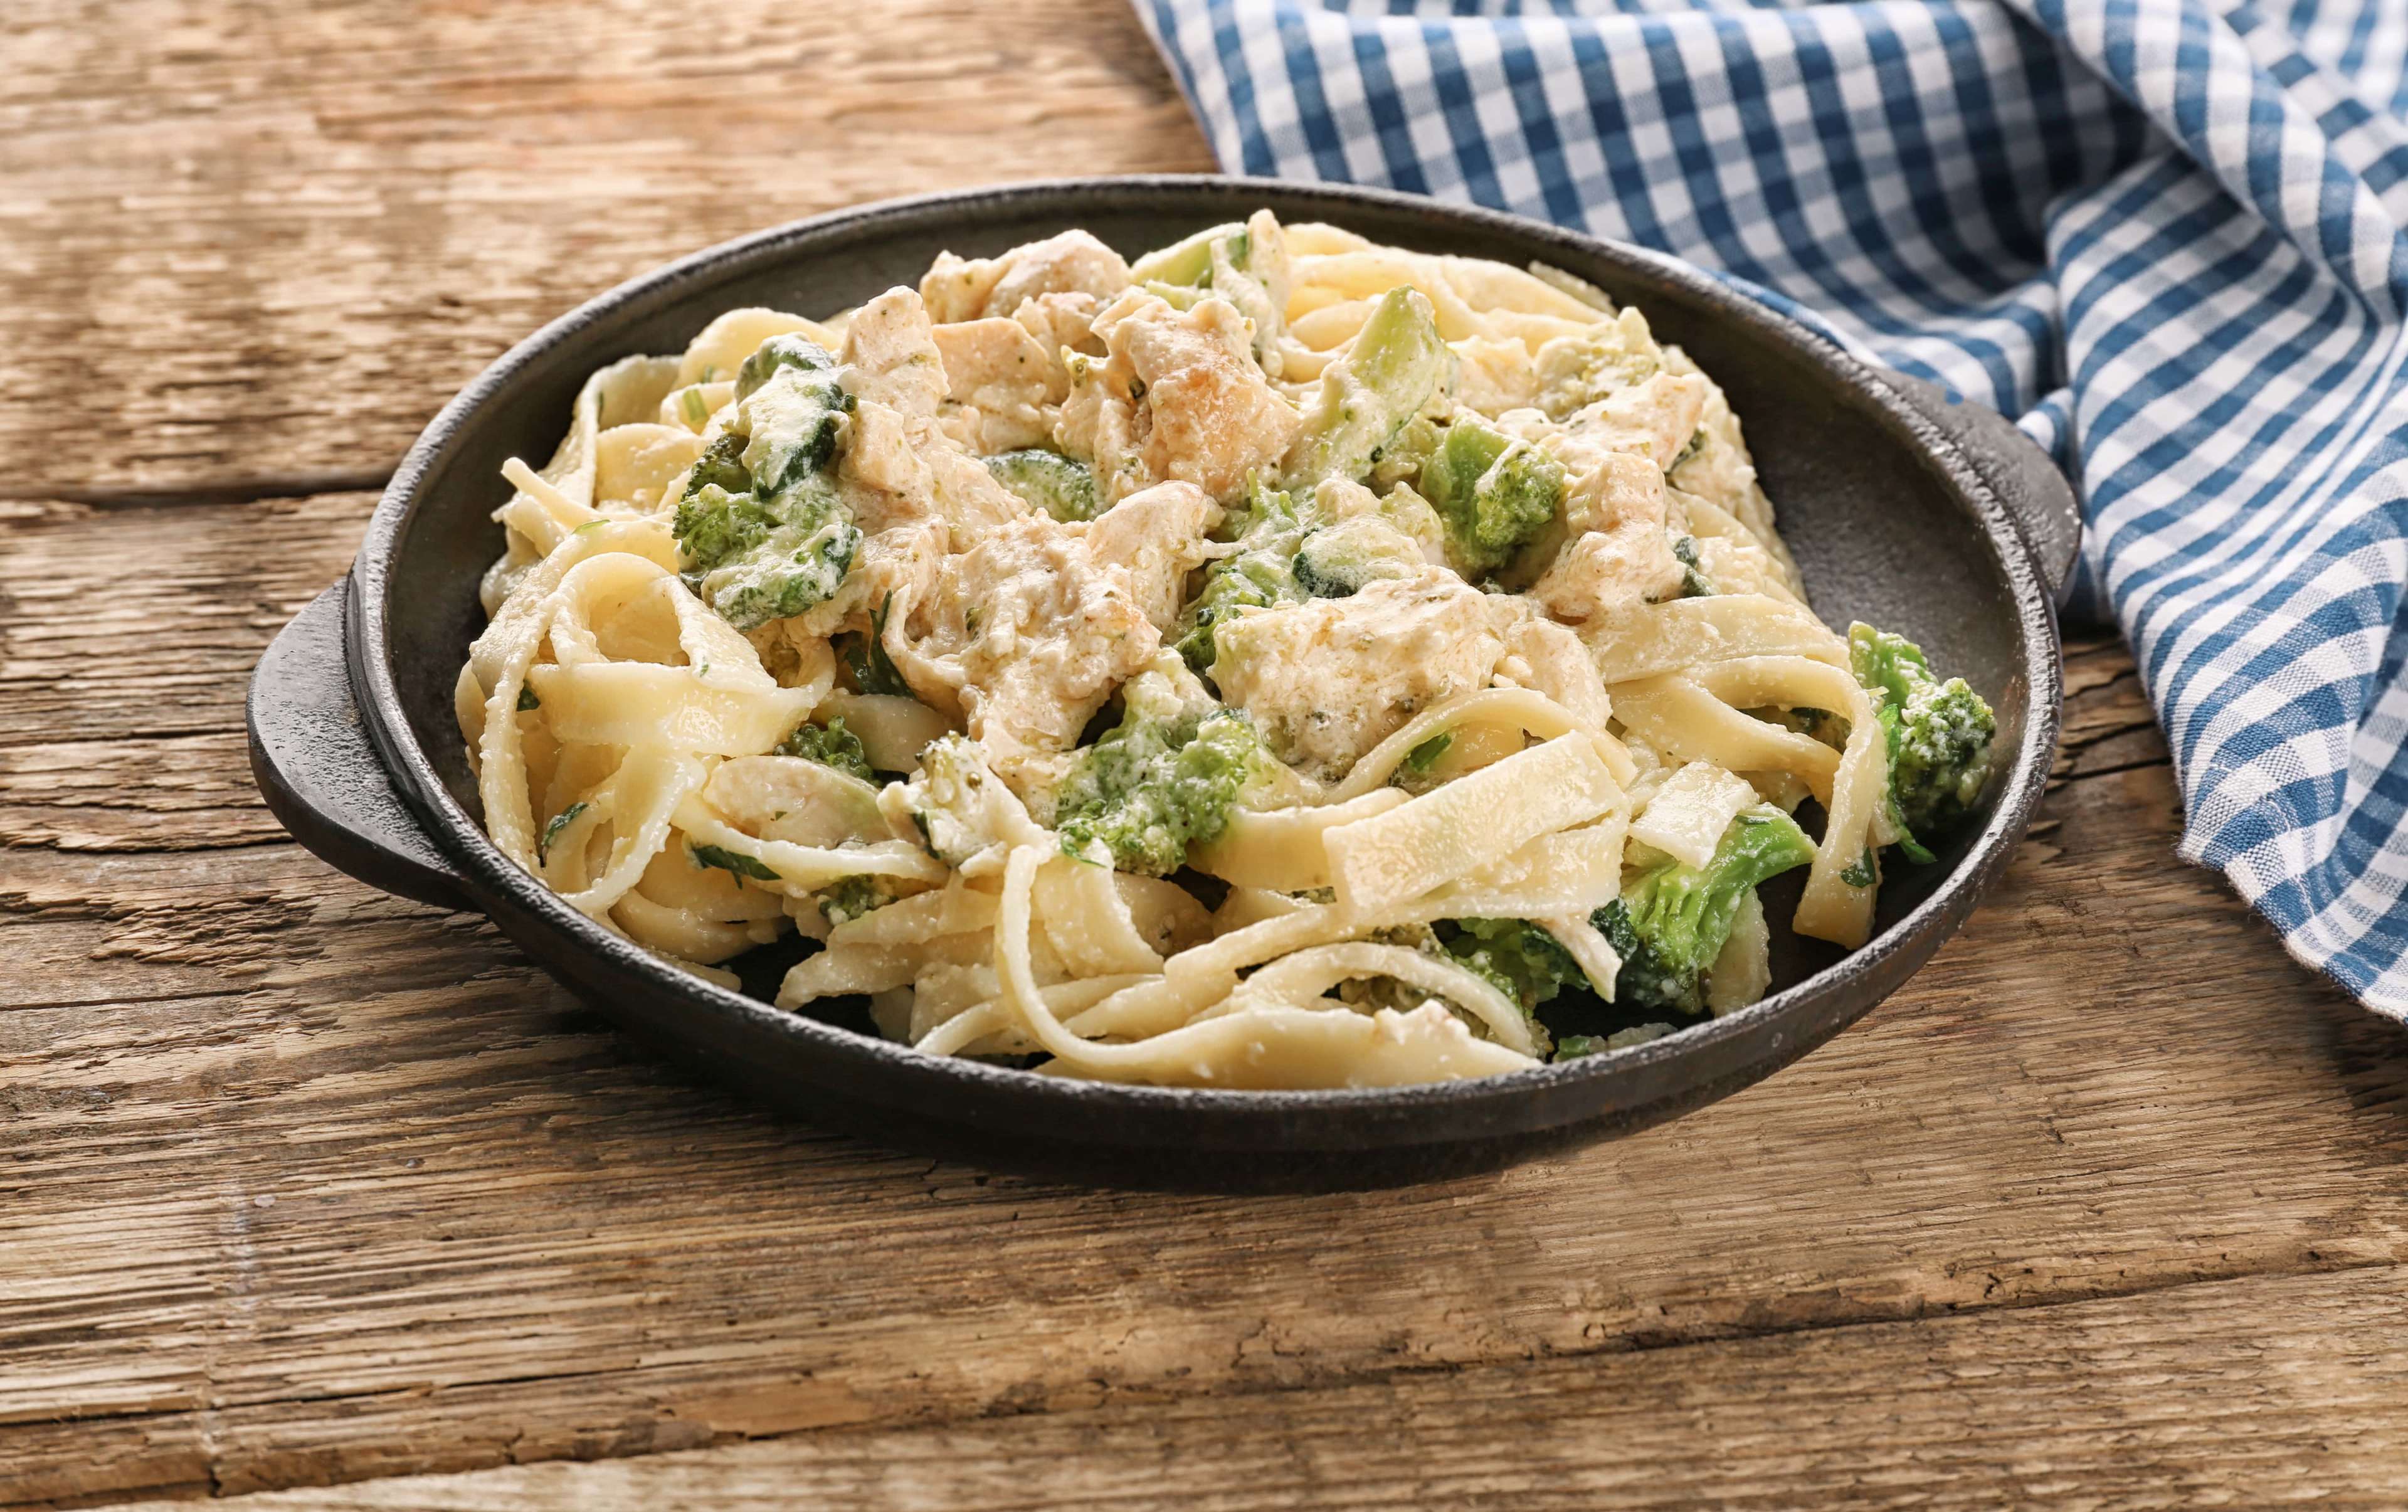 61bcc7abc9b13a3a027d1856_Frying%20pan%20with%20delicious%20chicken%20Alfredo.jpeg